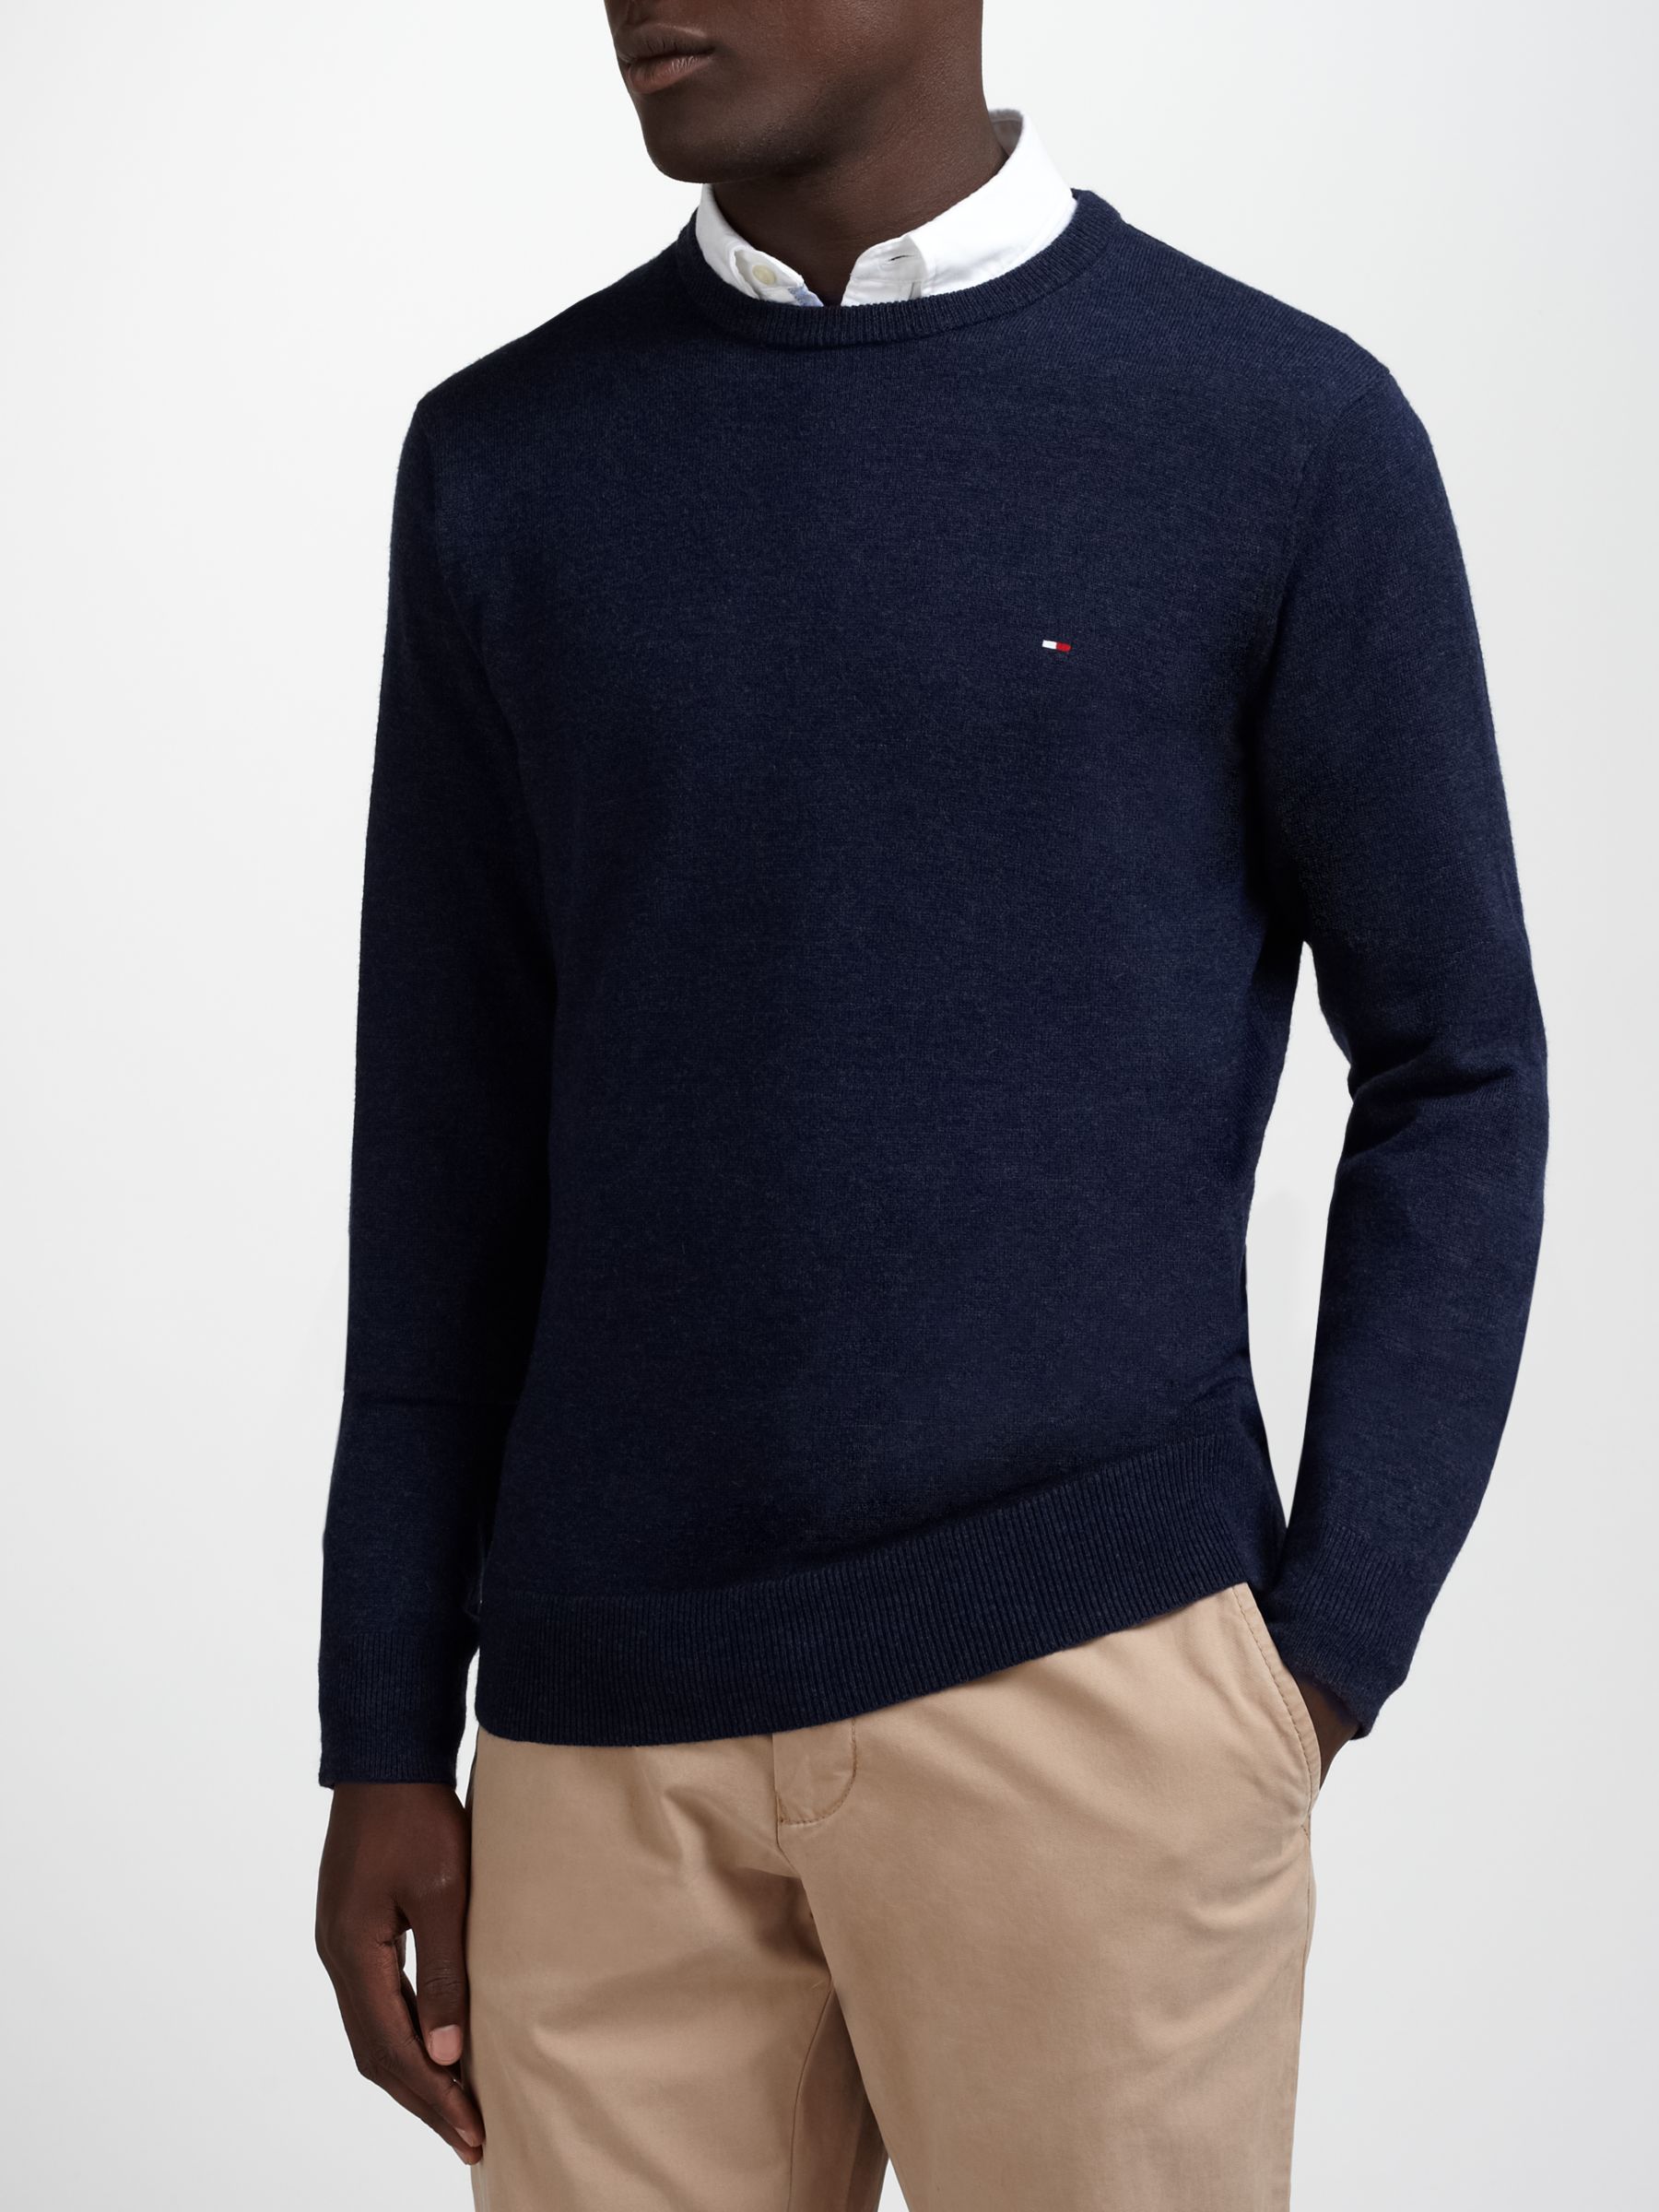 hilfiger lambswool pullover